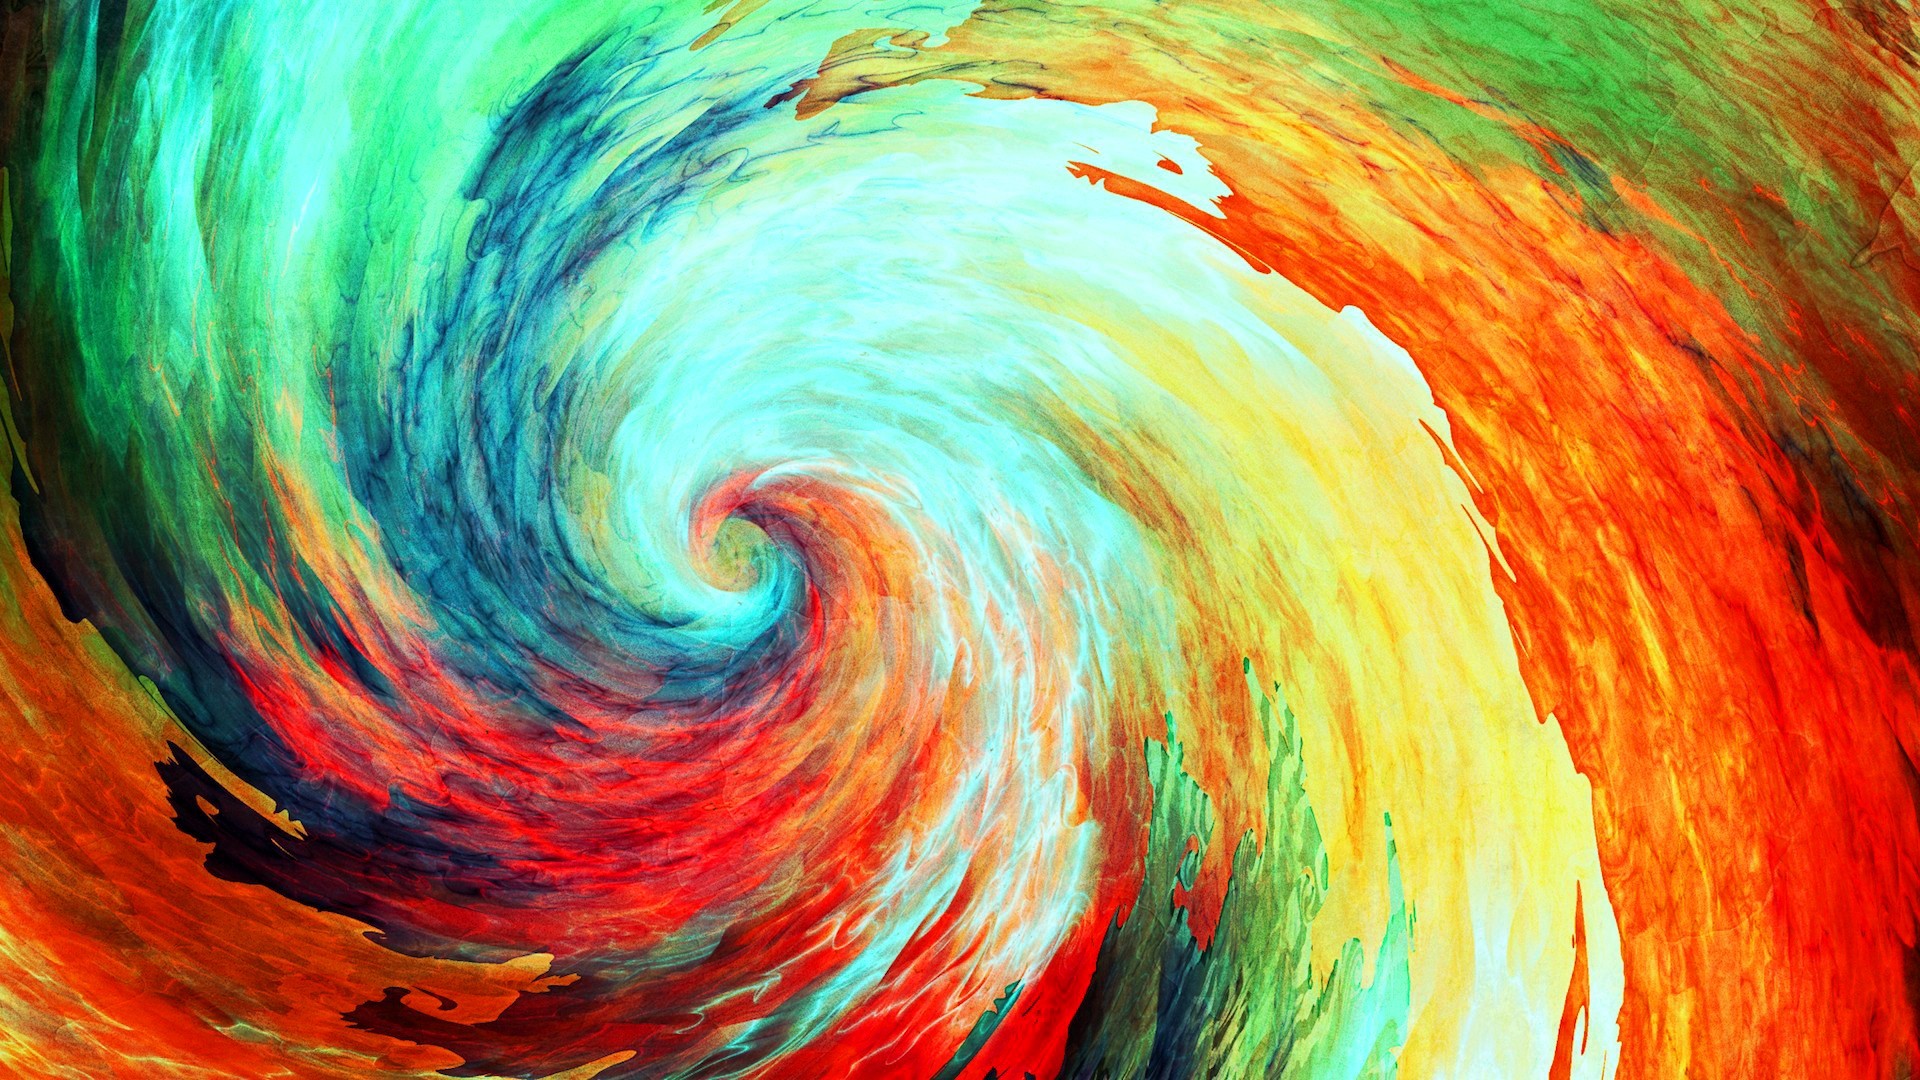 1920x1080  abstract colorful hurricane wallpaper and background JPG 674 kB